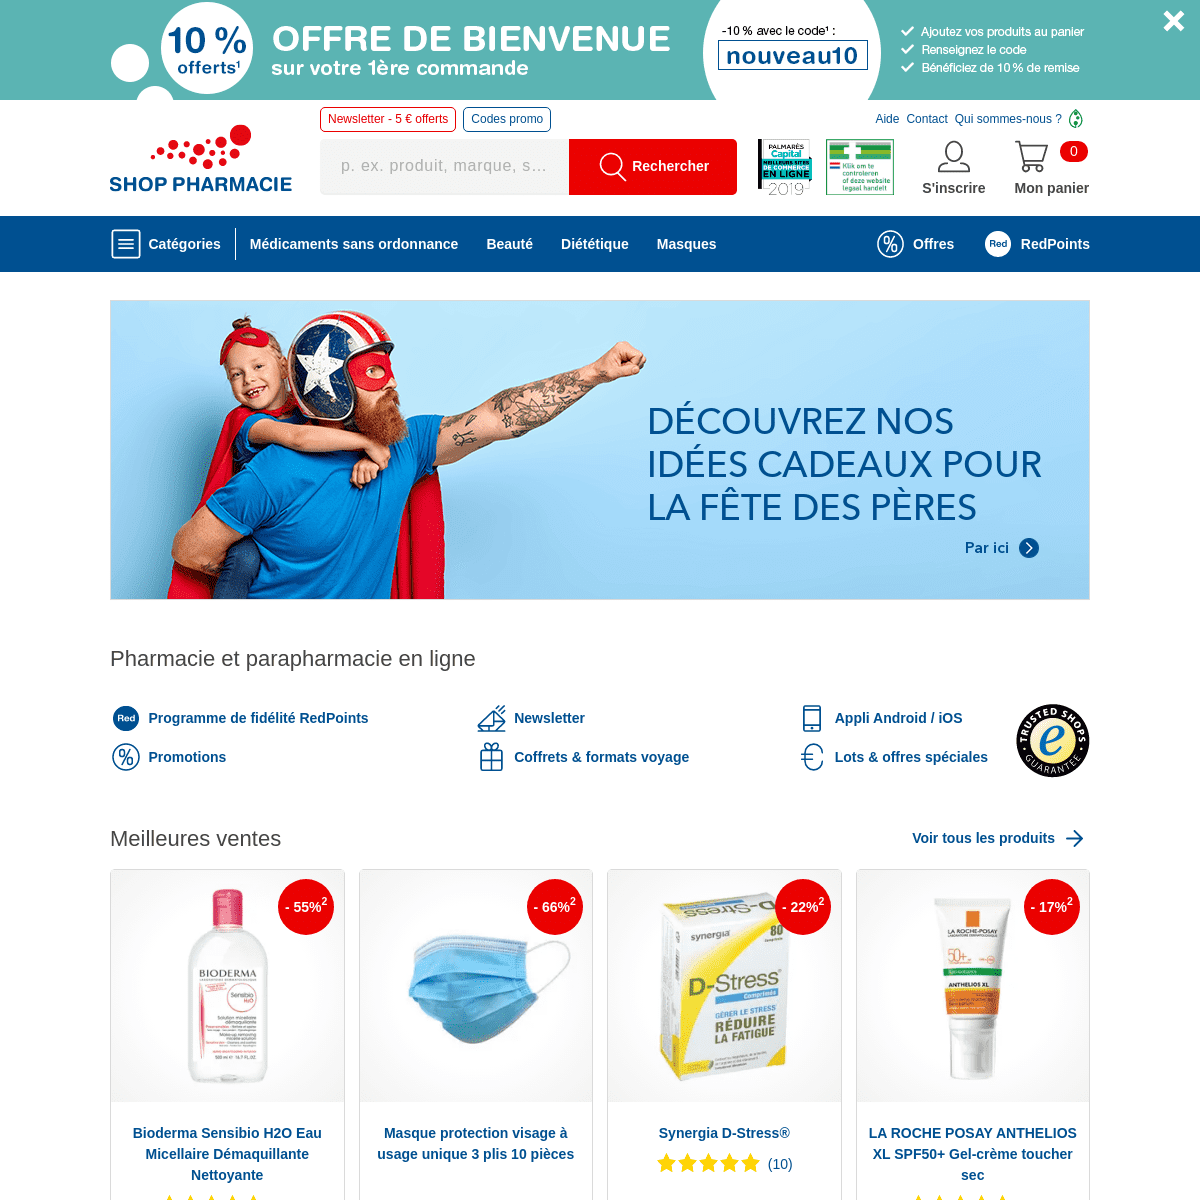 A complete backup of https://shop-pharmacie.fr